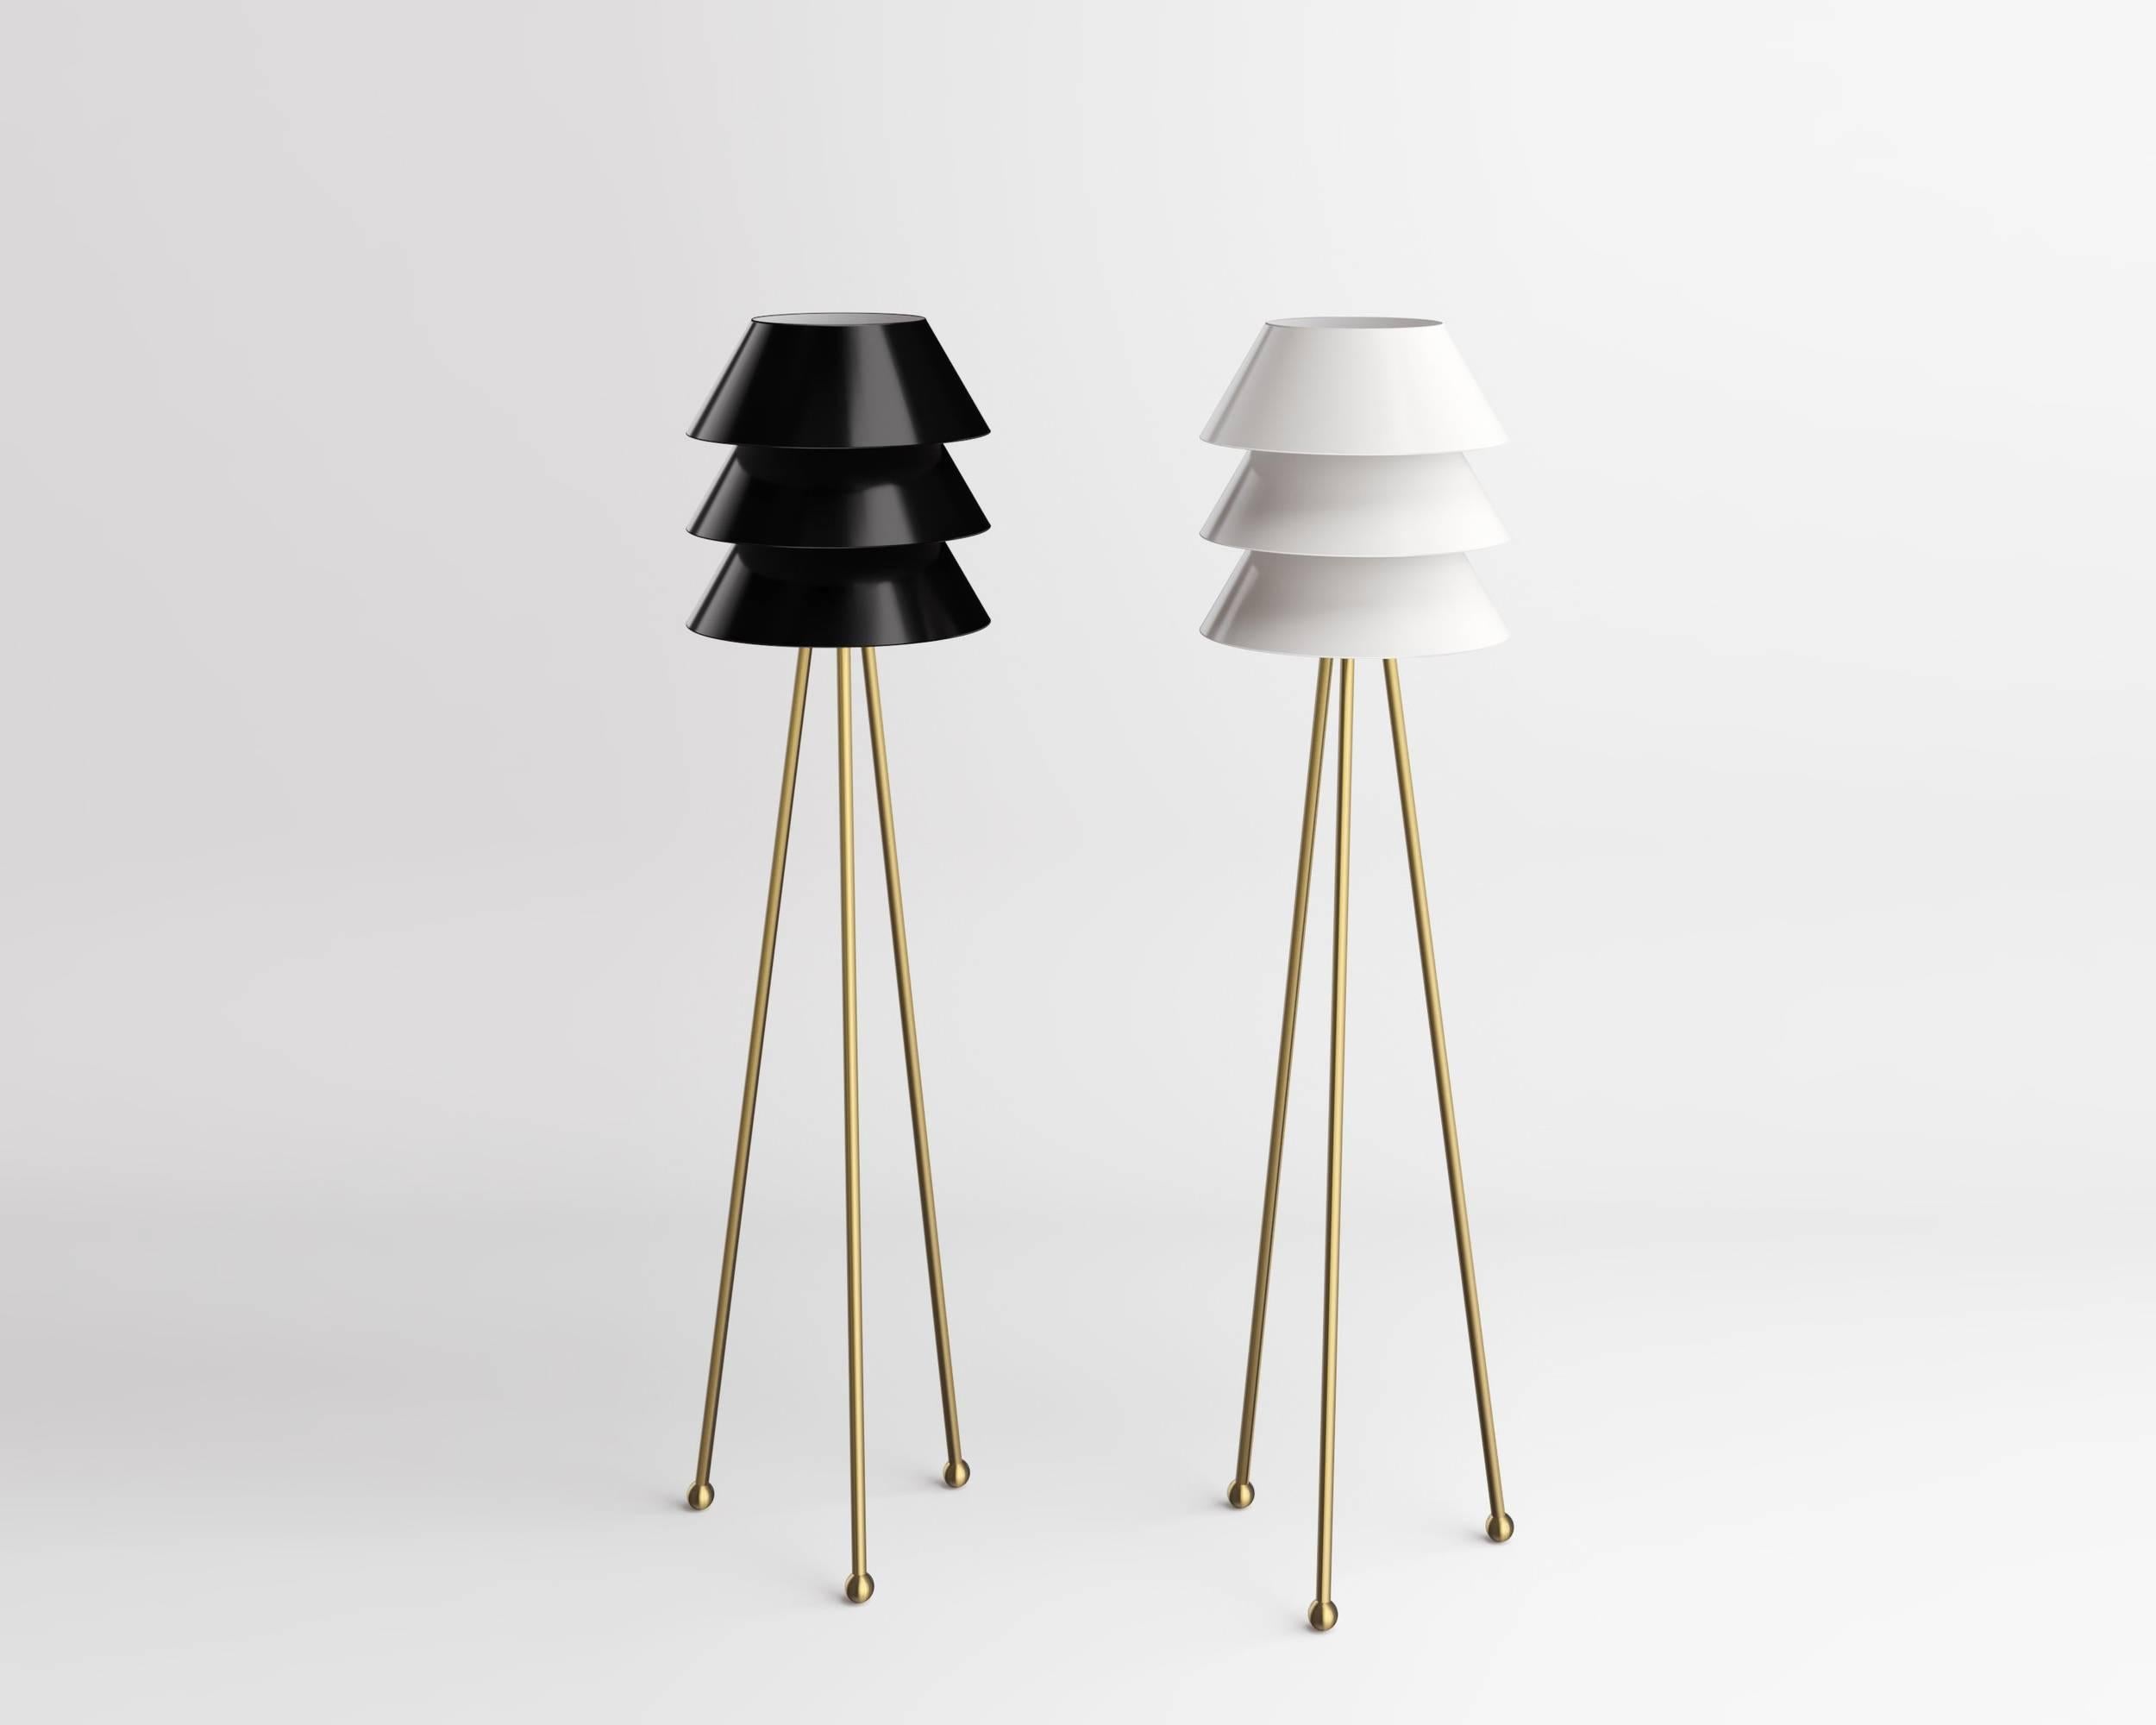 Floor lamp by Russian designer Dmitry Samygin

Brass tripod base, aluminium lampshade (black, white, red, green or yellow). 
Measures: 163 cm x 40 cm x 40 cm

After studying Applied Arts at the National University of Art and Industry,